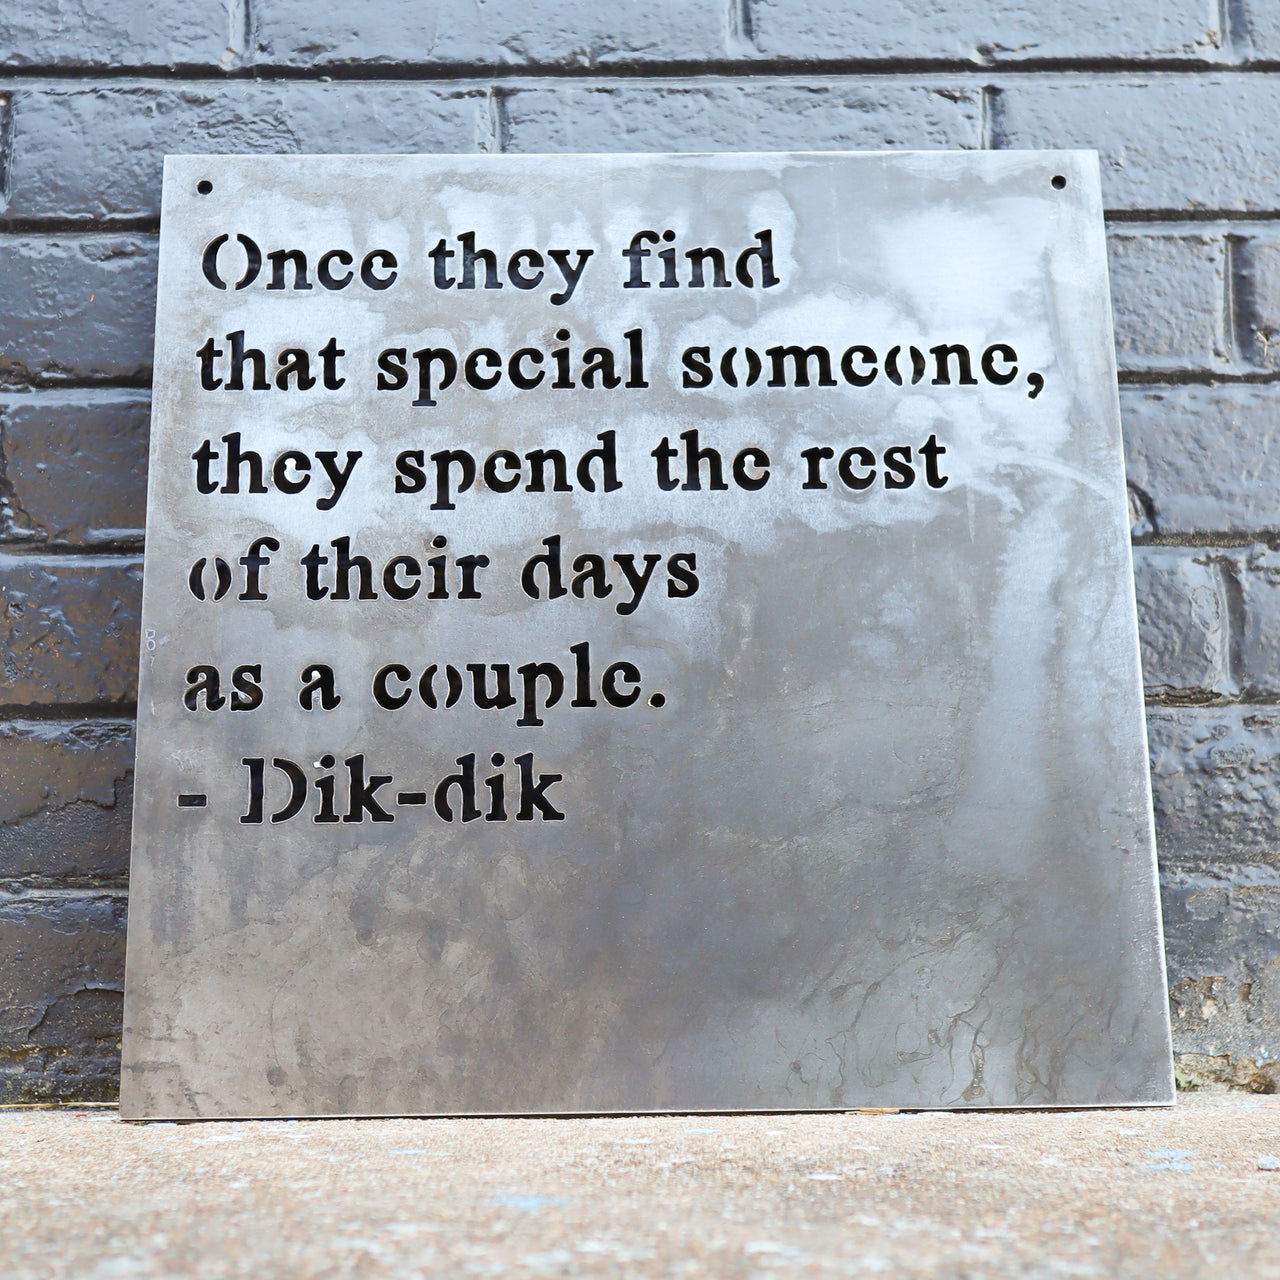 Personal Quote Wedding Sign - Personalized Metal Rustic Decor - Custom Words Wall Art